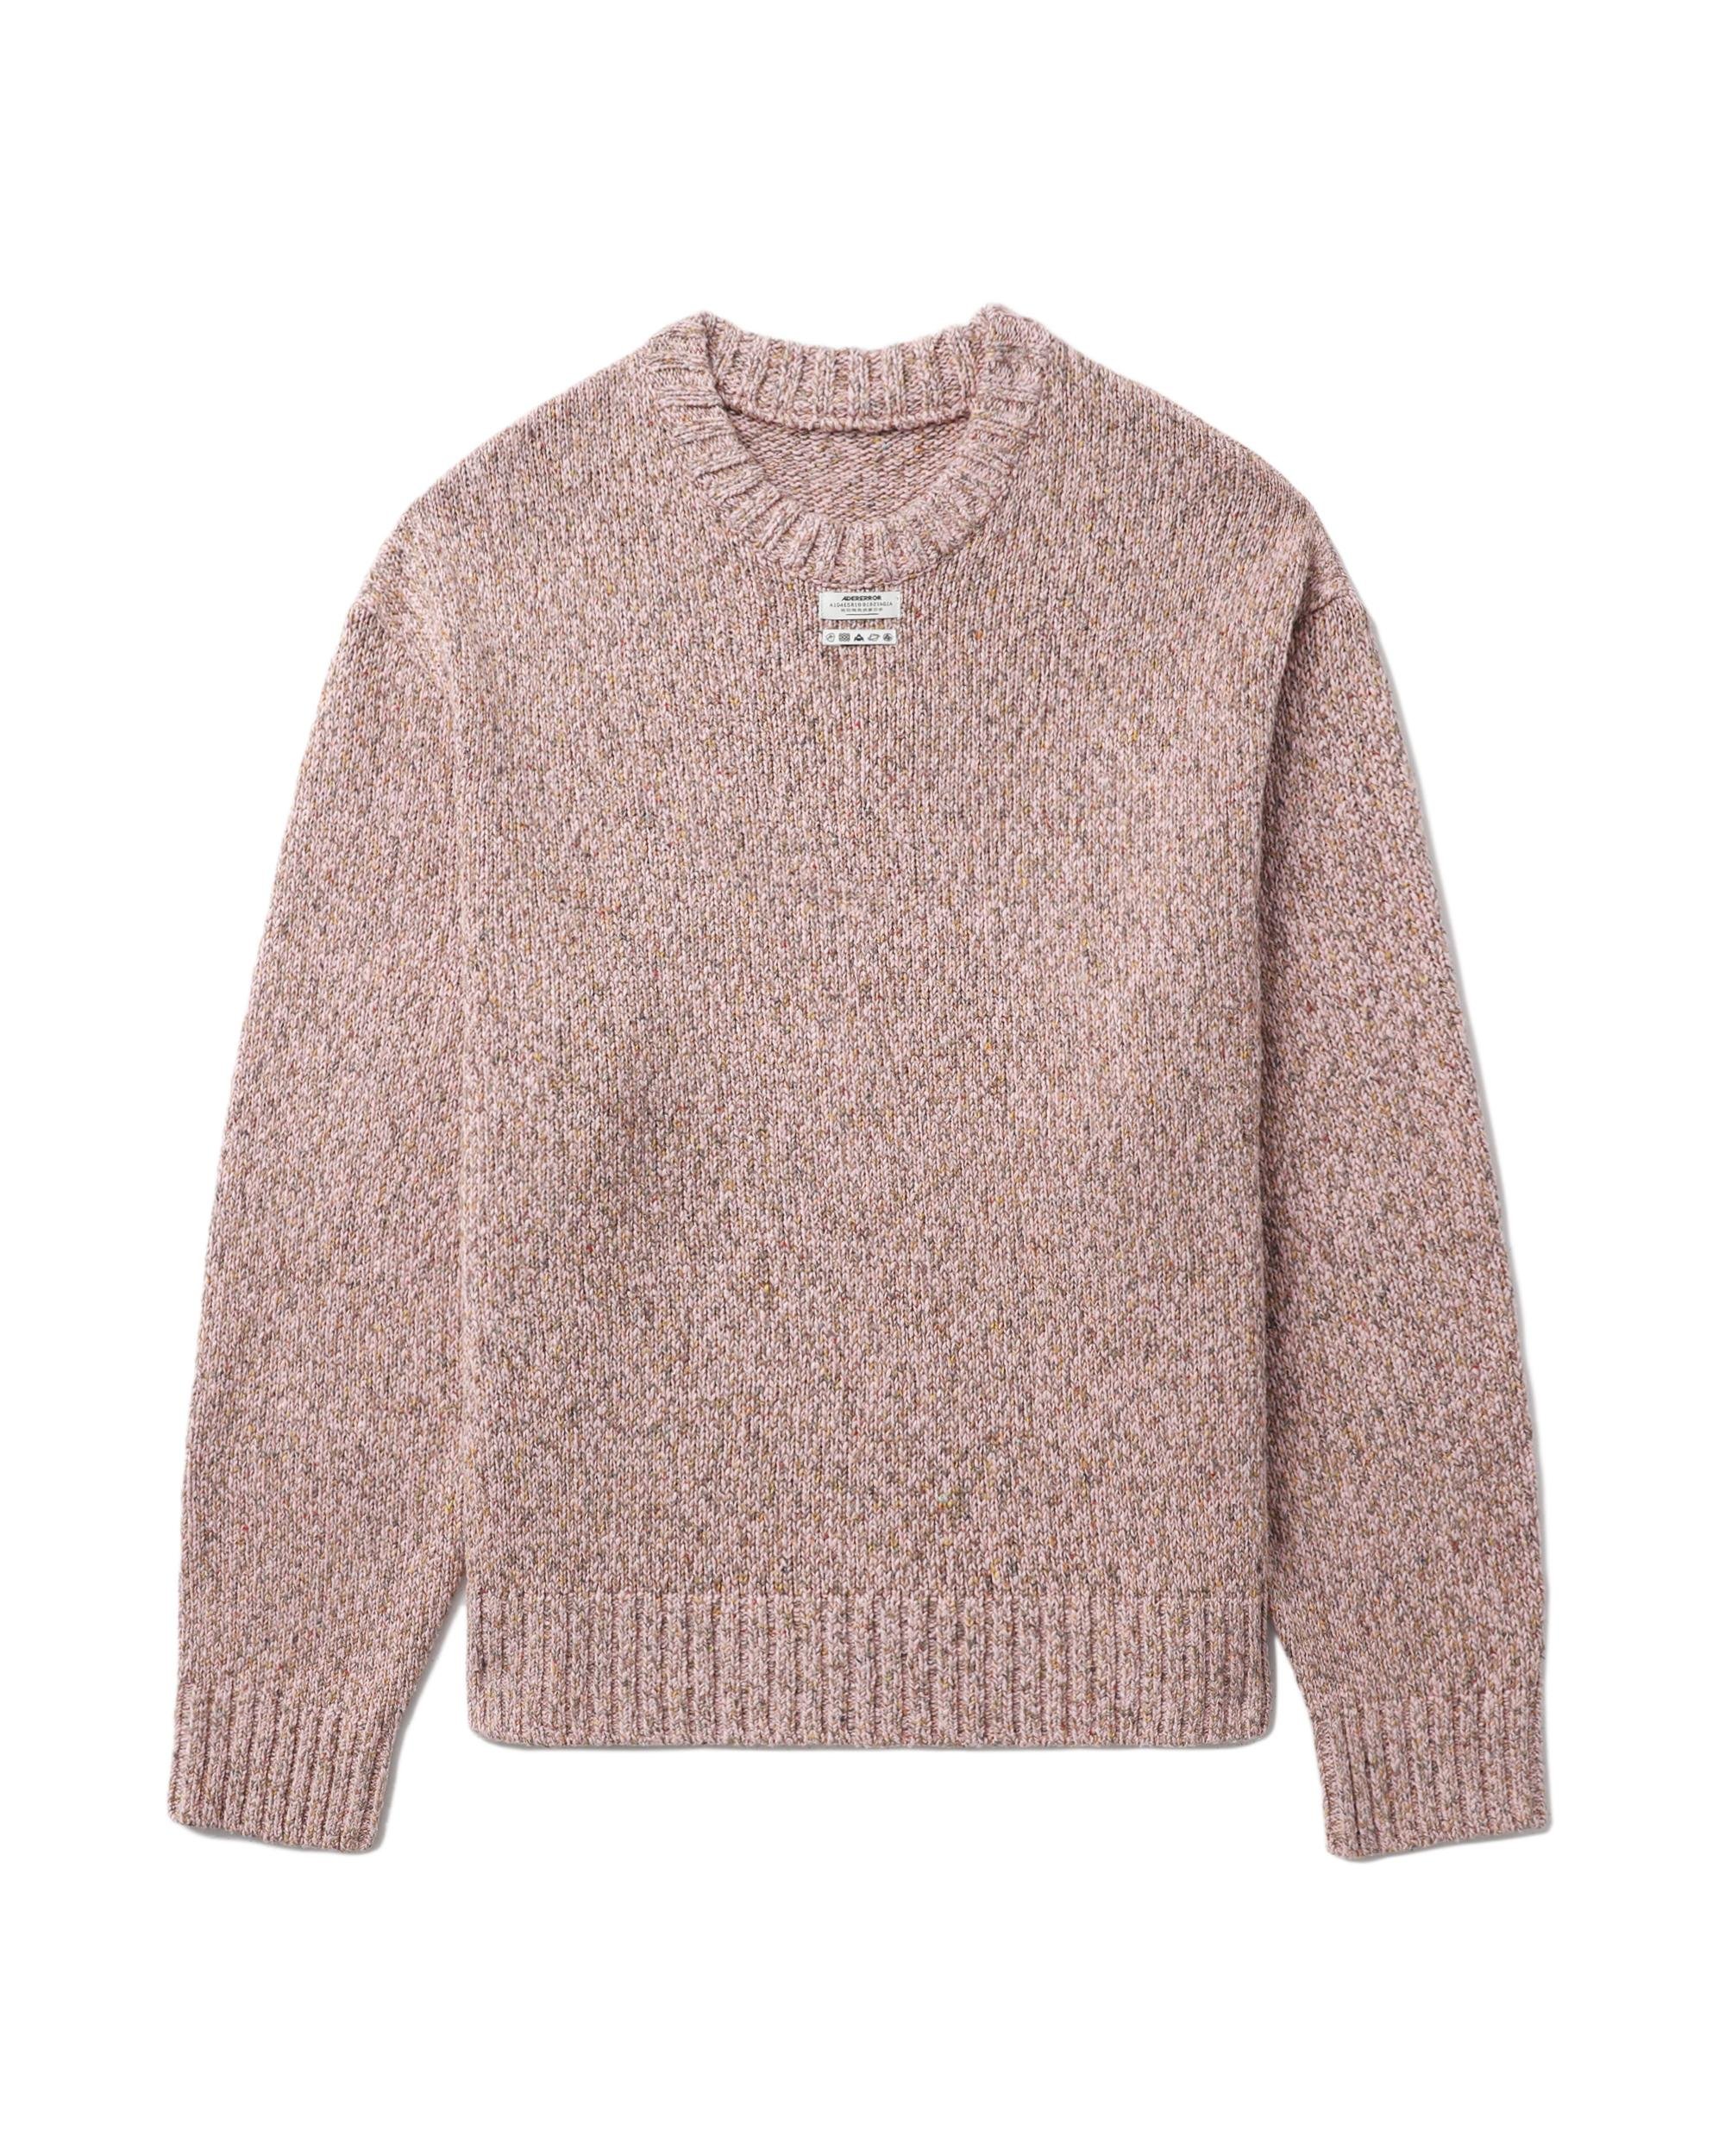 Marled-knit pullover by ADER ERROR